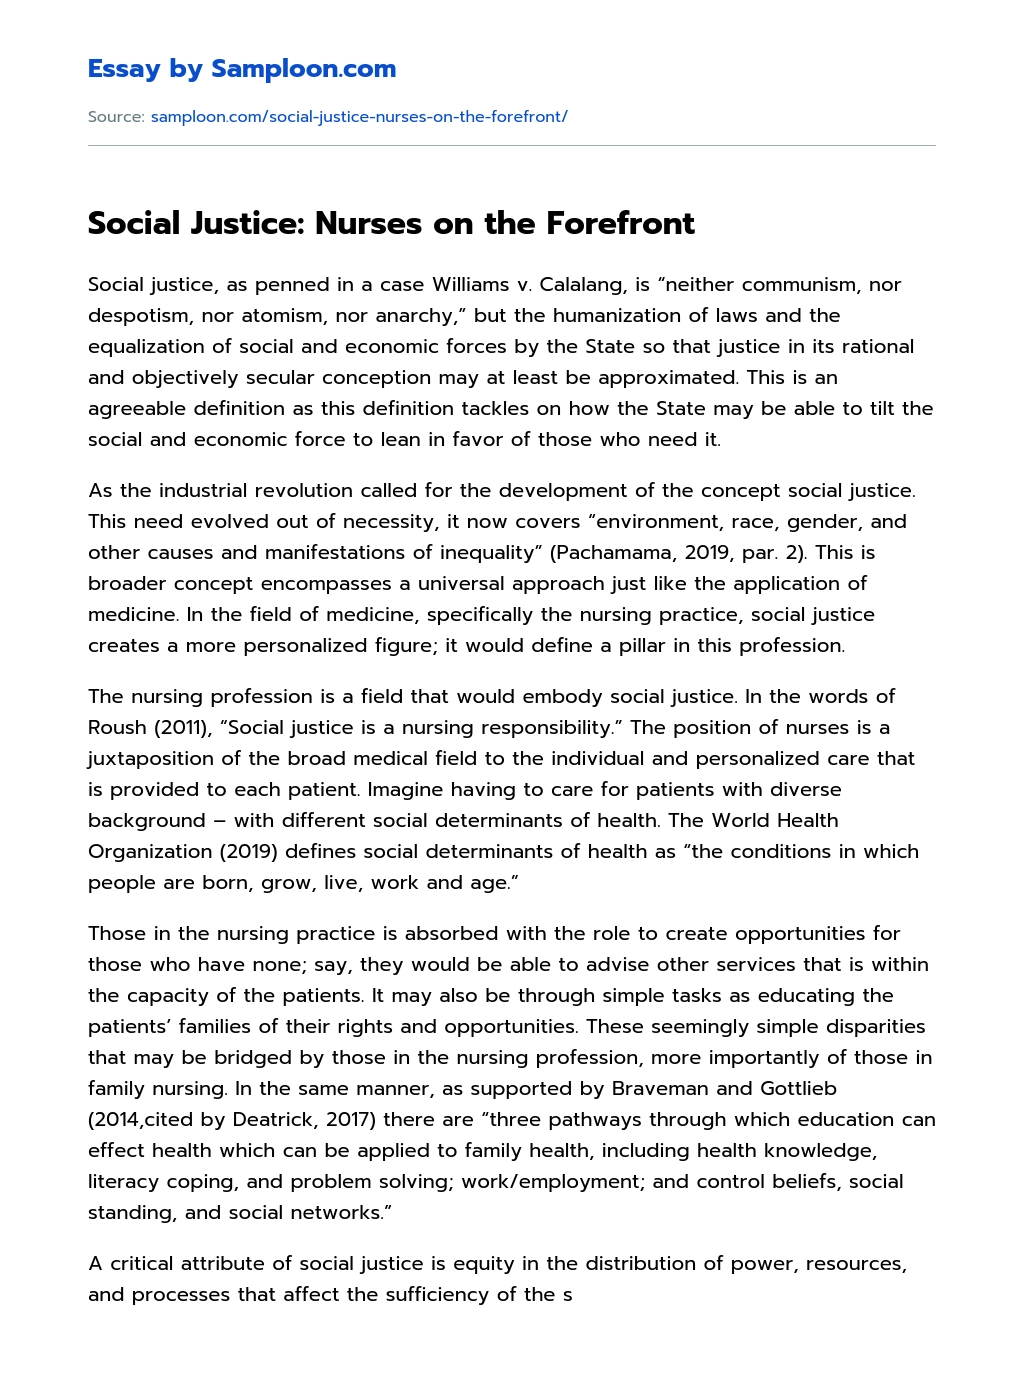 Social Justice: Nurses on the Forefront essay